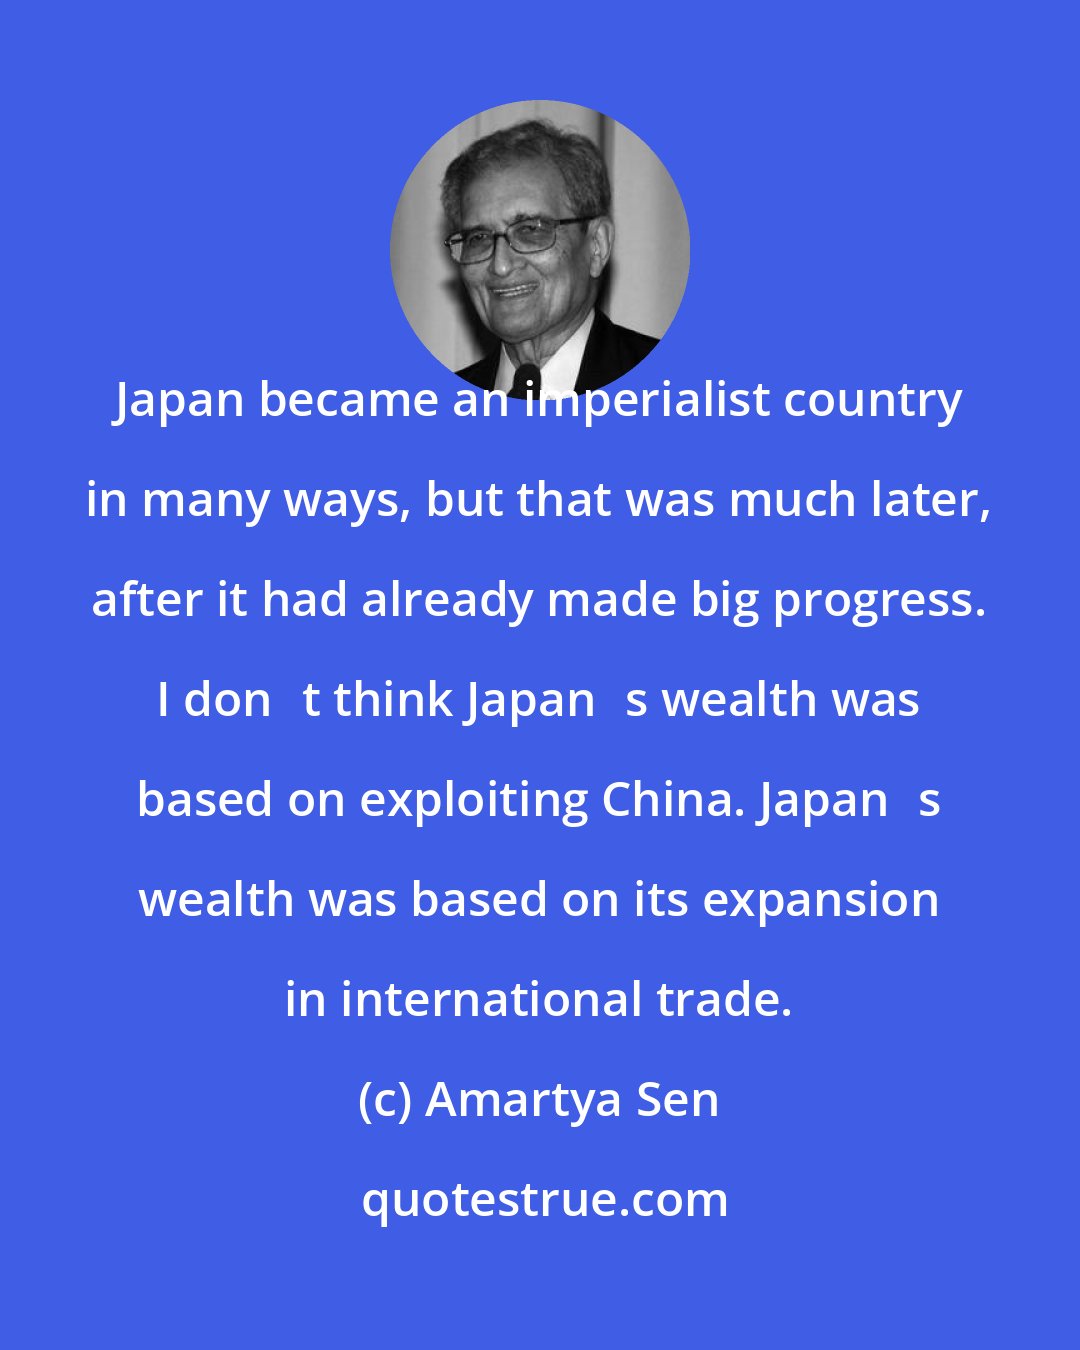 Amartya Sen: Japan became an imperialist country in many ways, but that was much later, after it had already made big progress. I dont think Japans wealth was based on exploiting China. Japans wealth was based on its expansion in international trade.